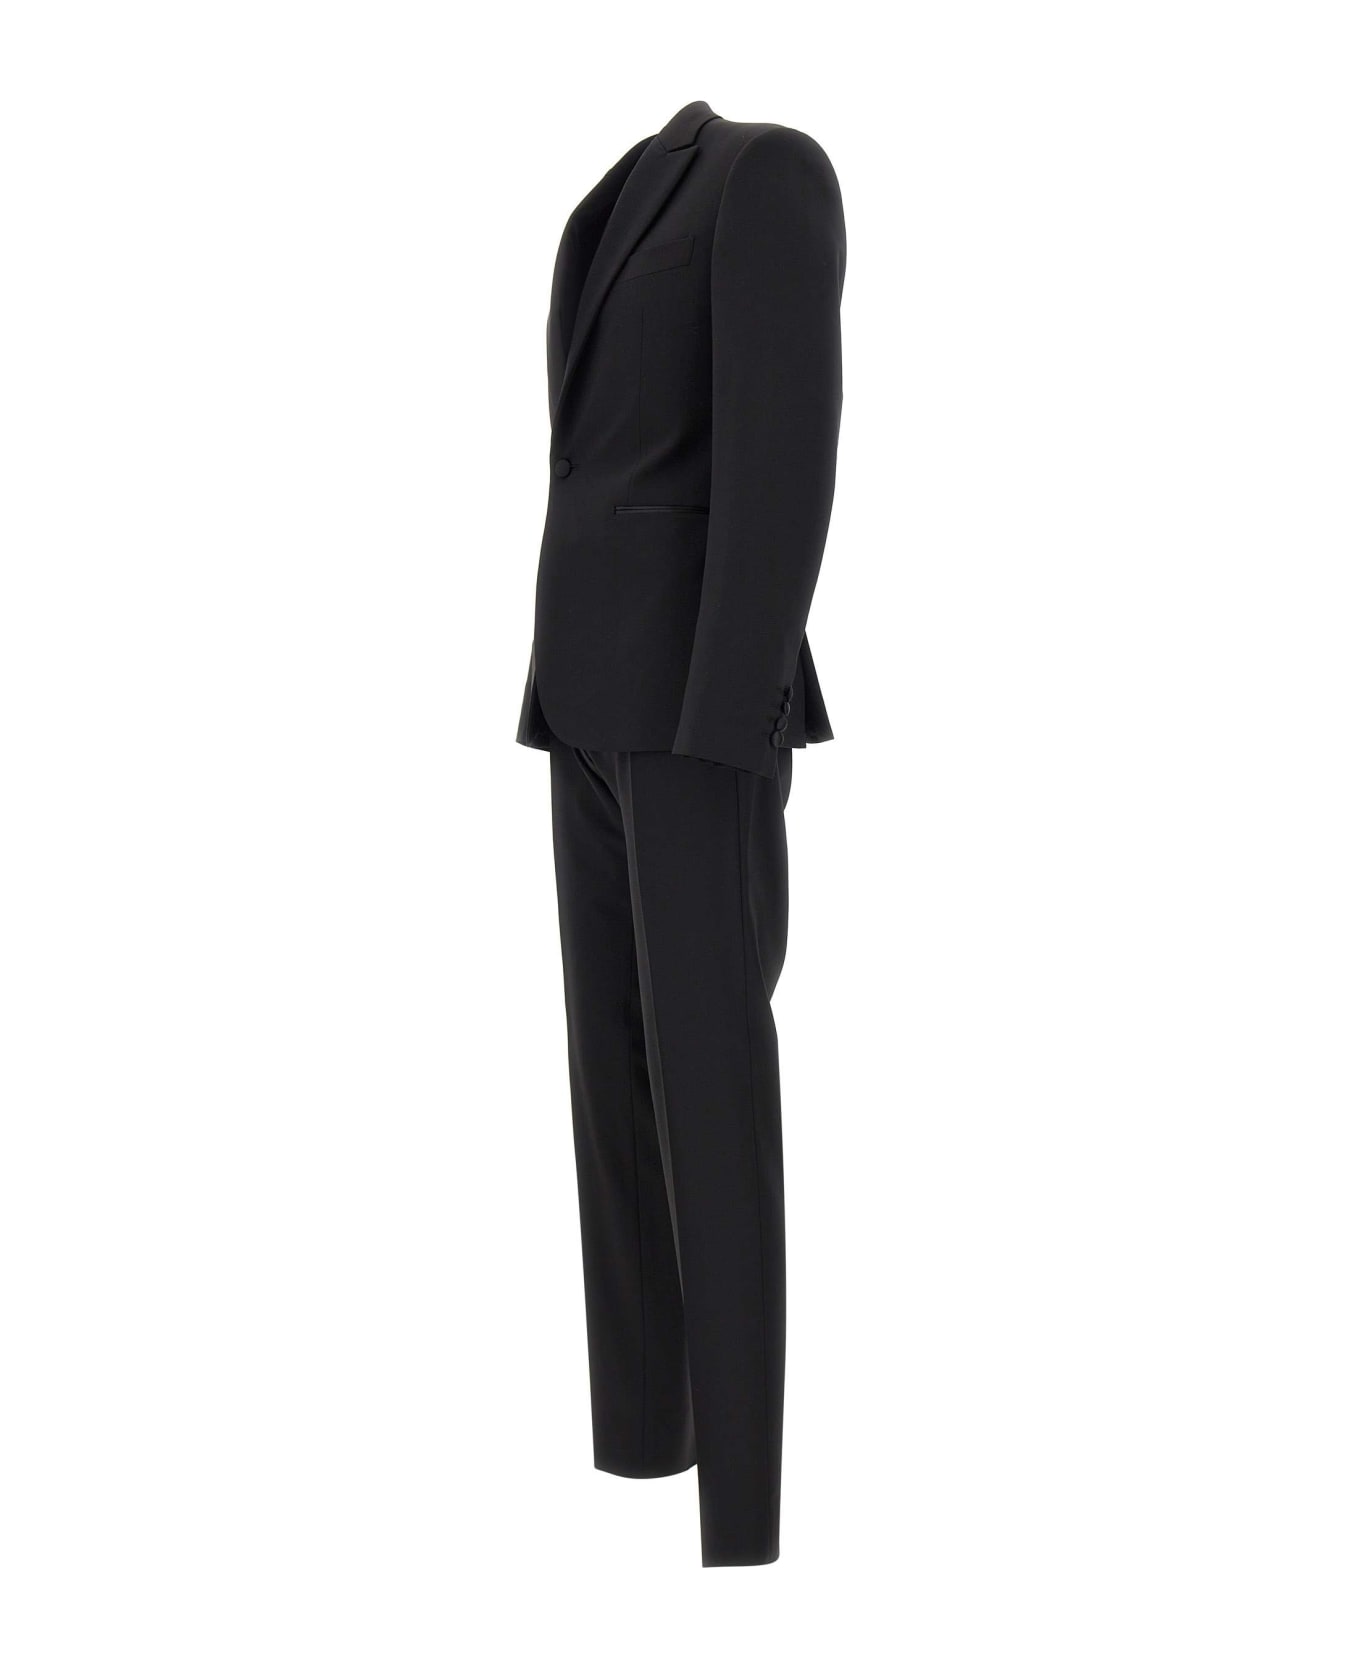 Emporio Armani Cool Wool Two-piece Formal Suit - BLACK スーツ